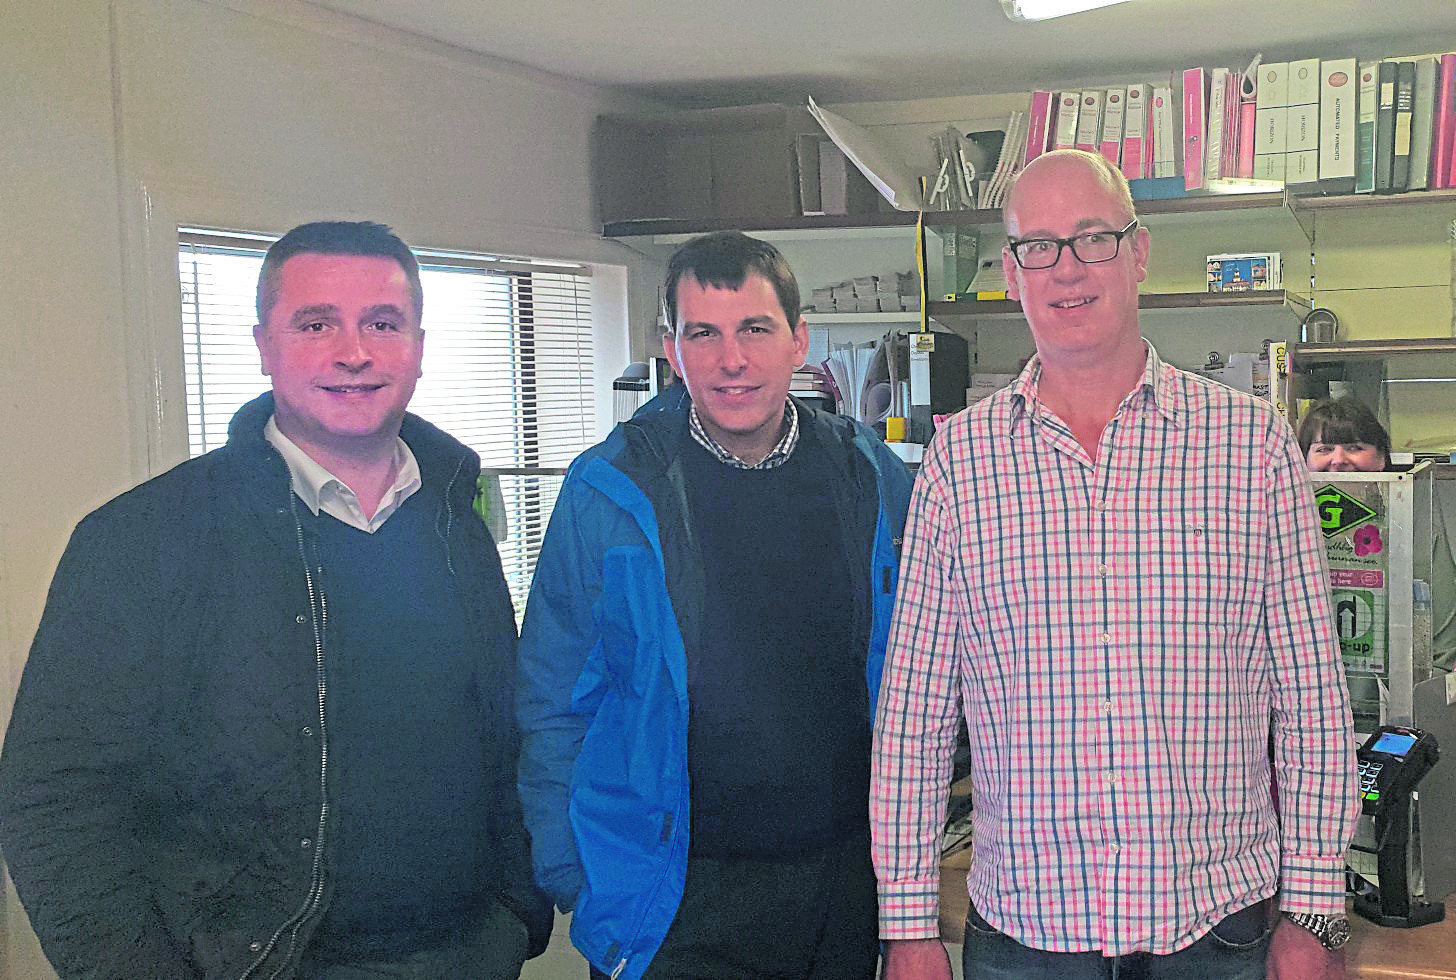 UK Minister John Glen visits Barra over banks
In Castlebay Post Office, which is where people will have to go for banking if the RBS branch closes. L to R are Angus MacNeil MP, UK Treasury Minister John Glen and Chris Dillerstone of the Post Office.